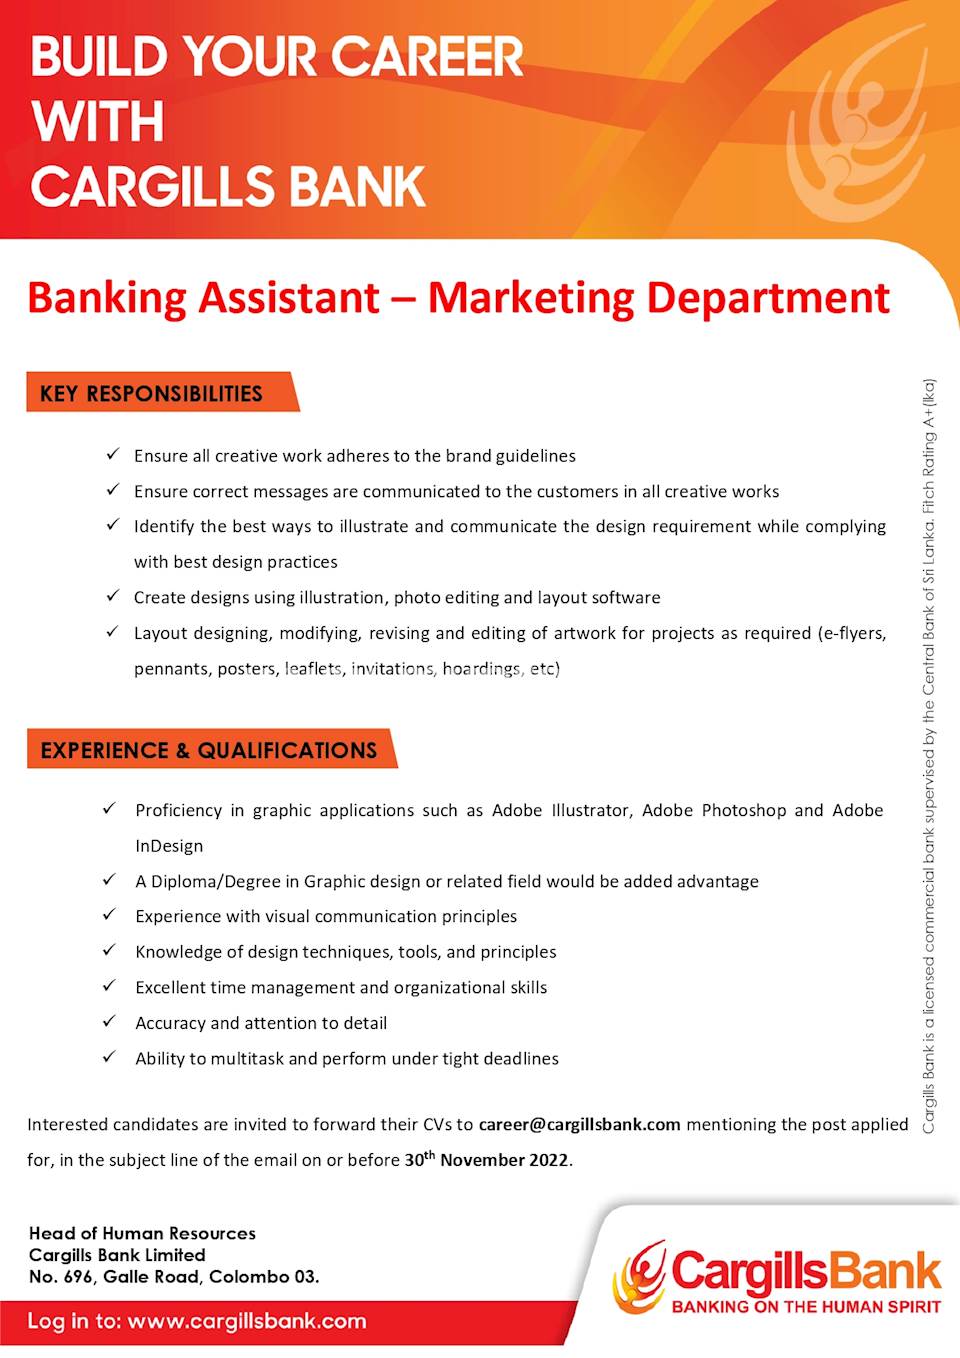 Banking Assistant - Marketing Department